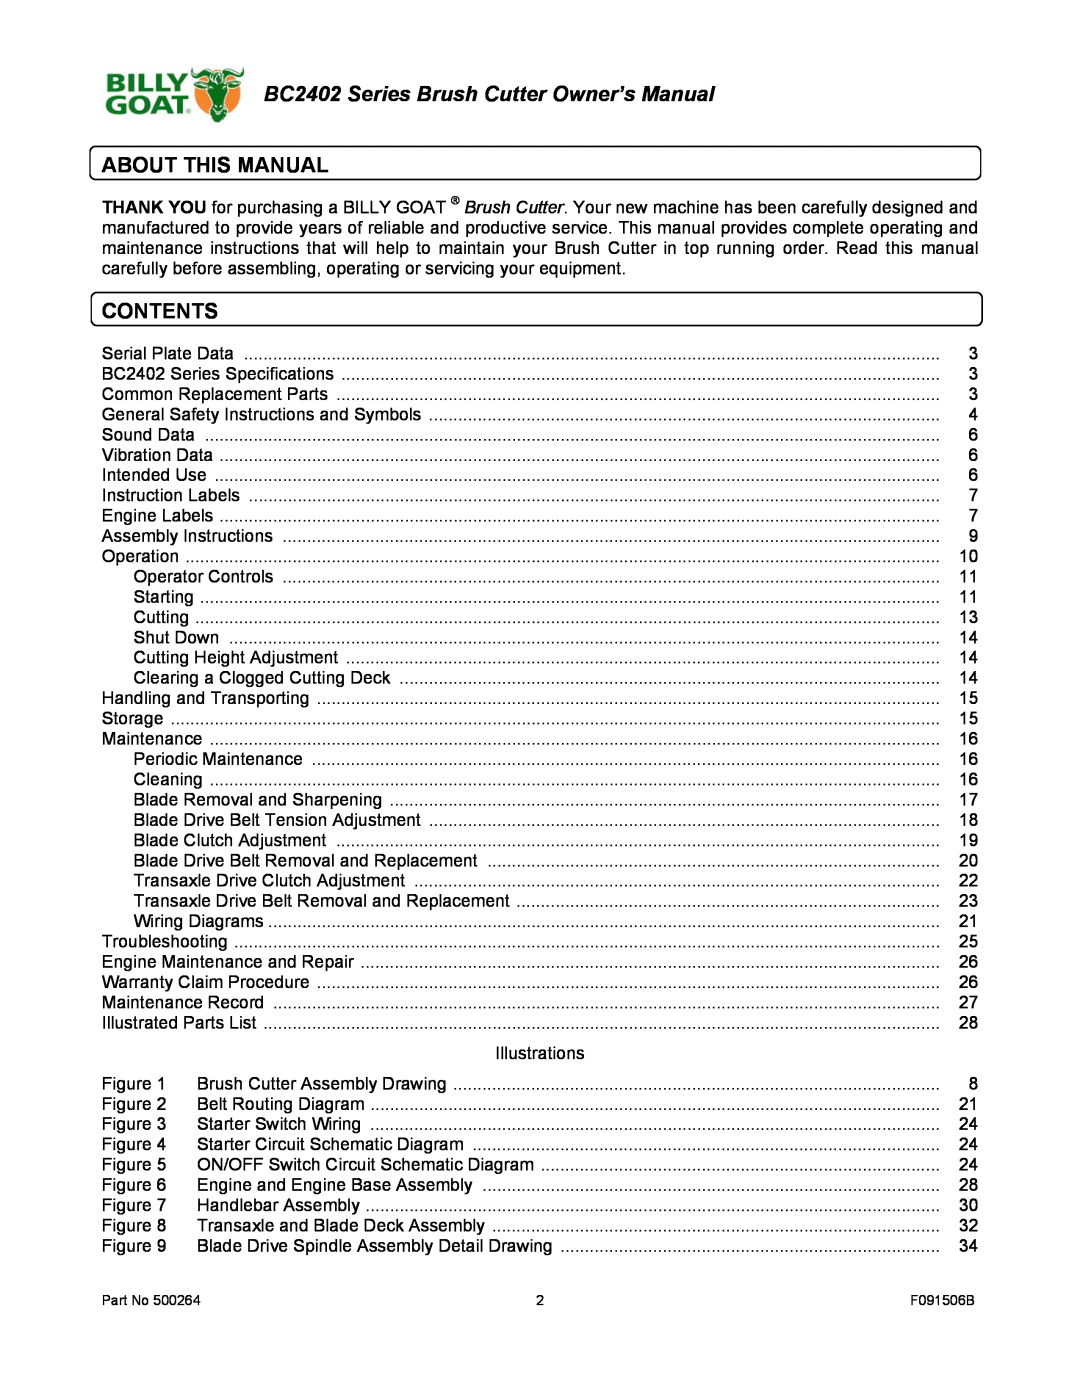 Billy Goat BC2402 owner manual About This Manual, Contents 